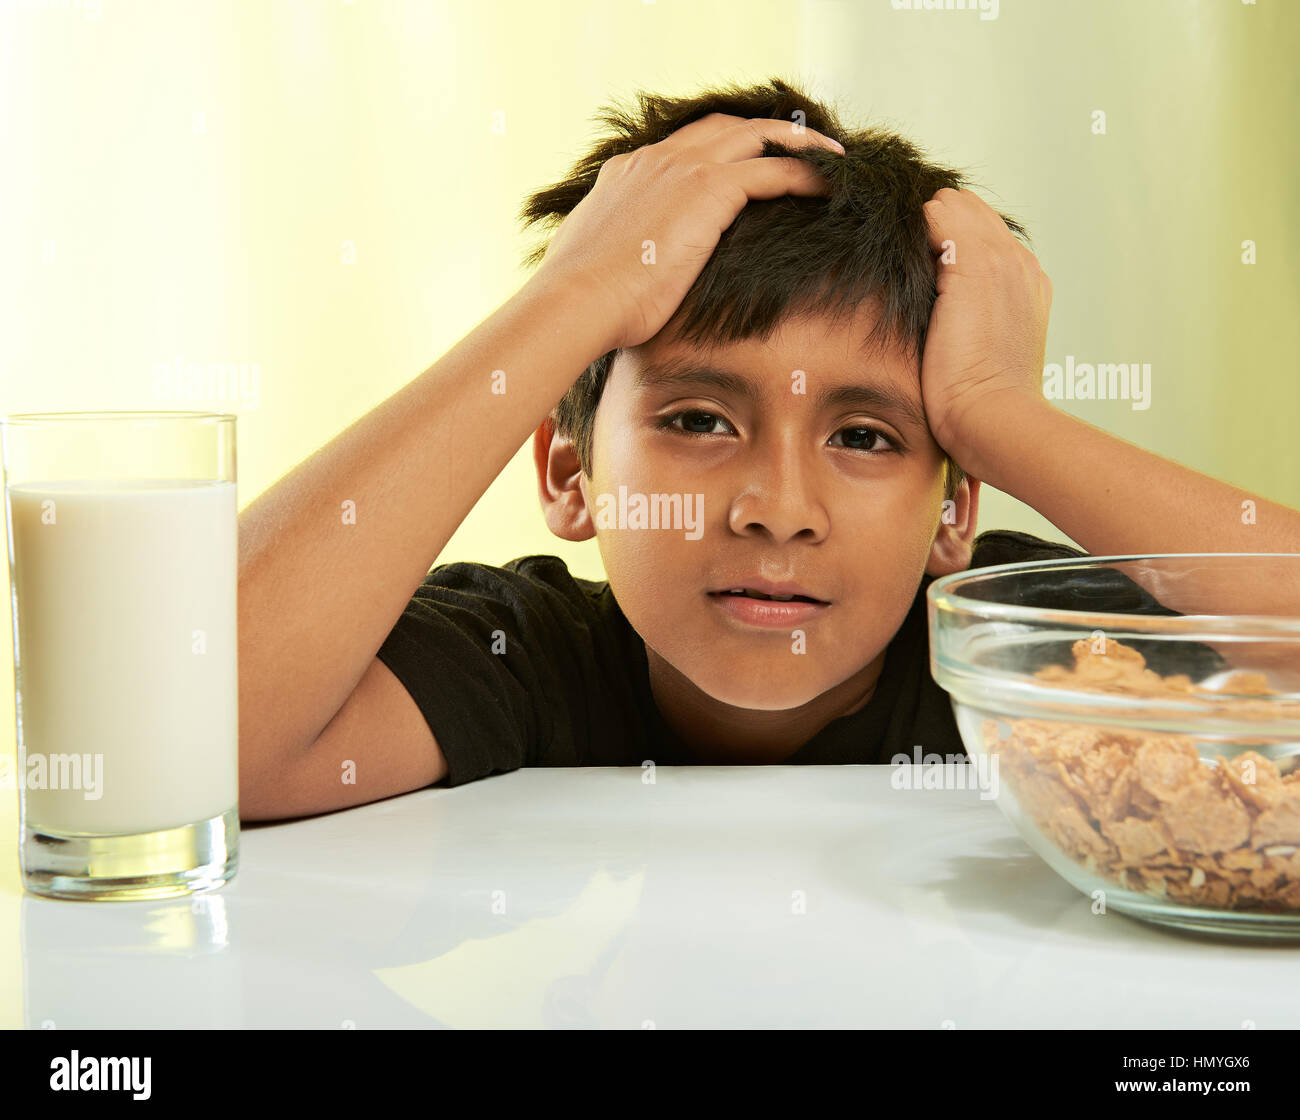 bored boy at breakfast isolated on yellow Stock Photo